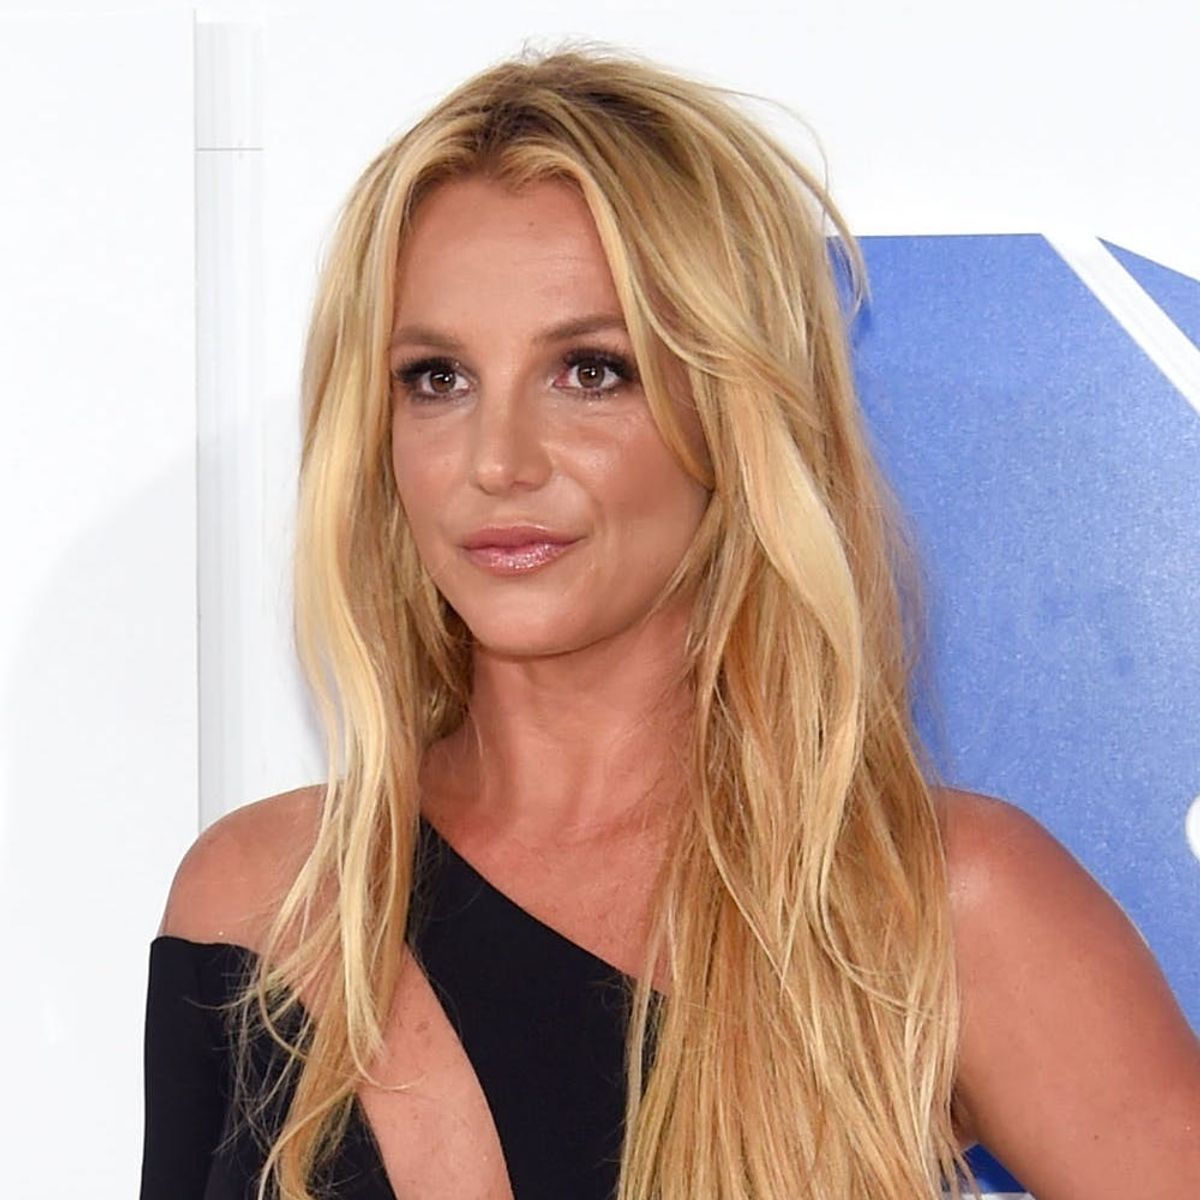 This Britney Spears Biopic Trailer Is Full of Drama from Her Rougher Years